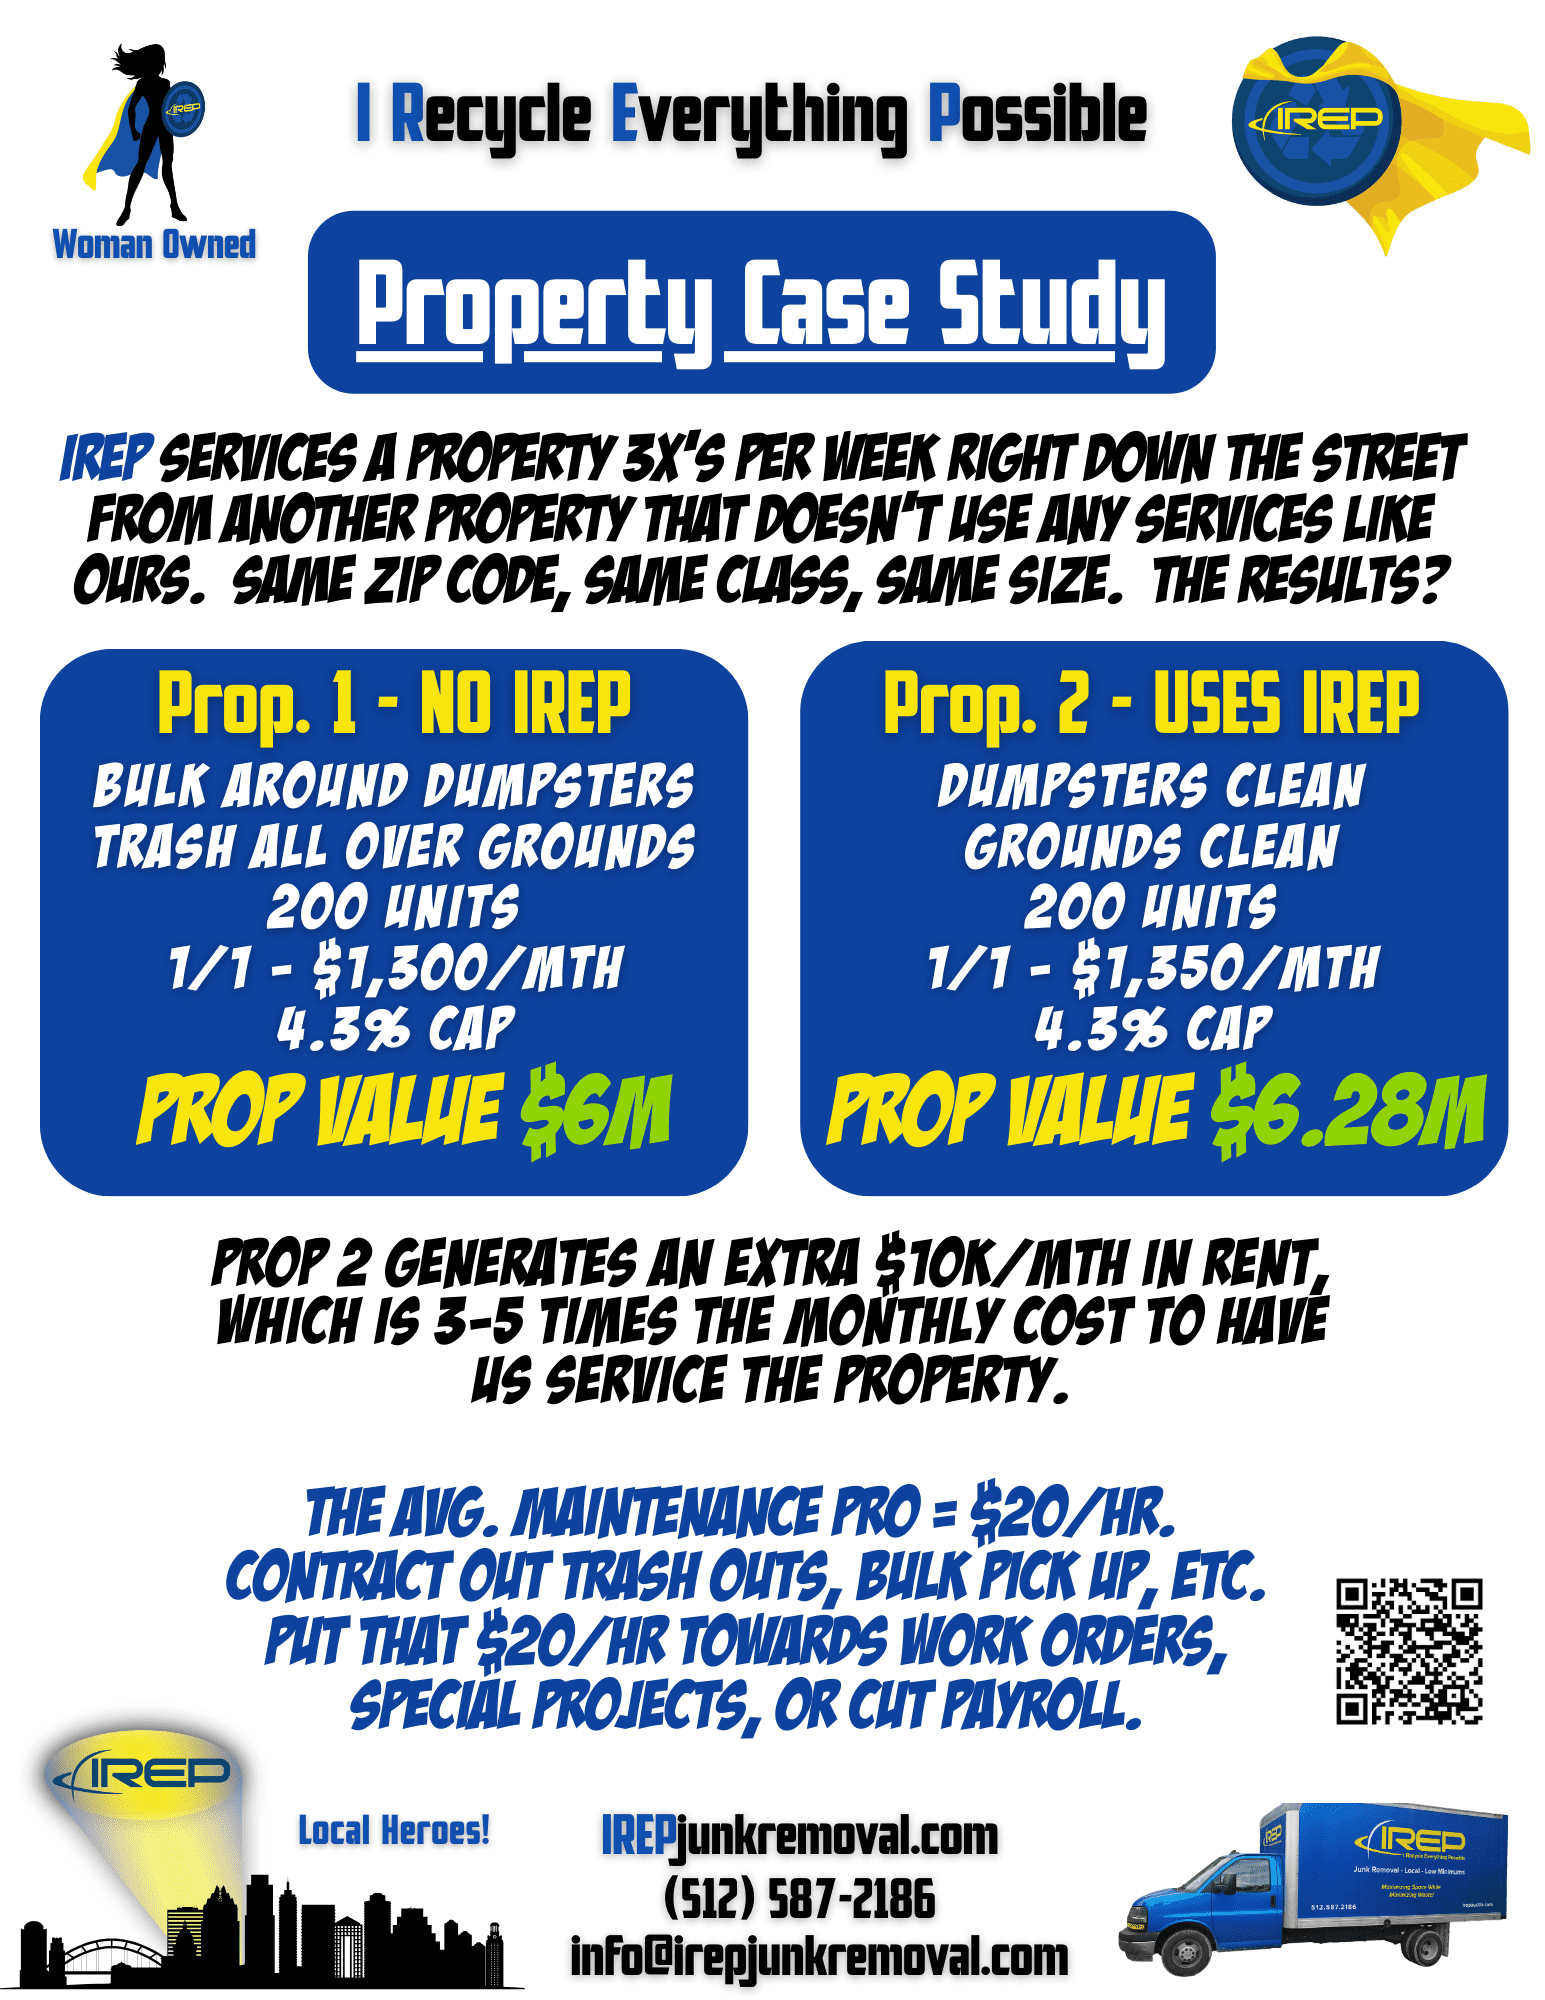 property case study that shows how IREP Junk Removal can add value to the properties like apartment complexes